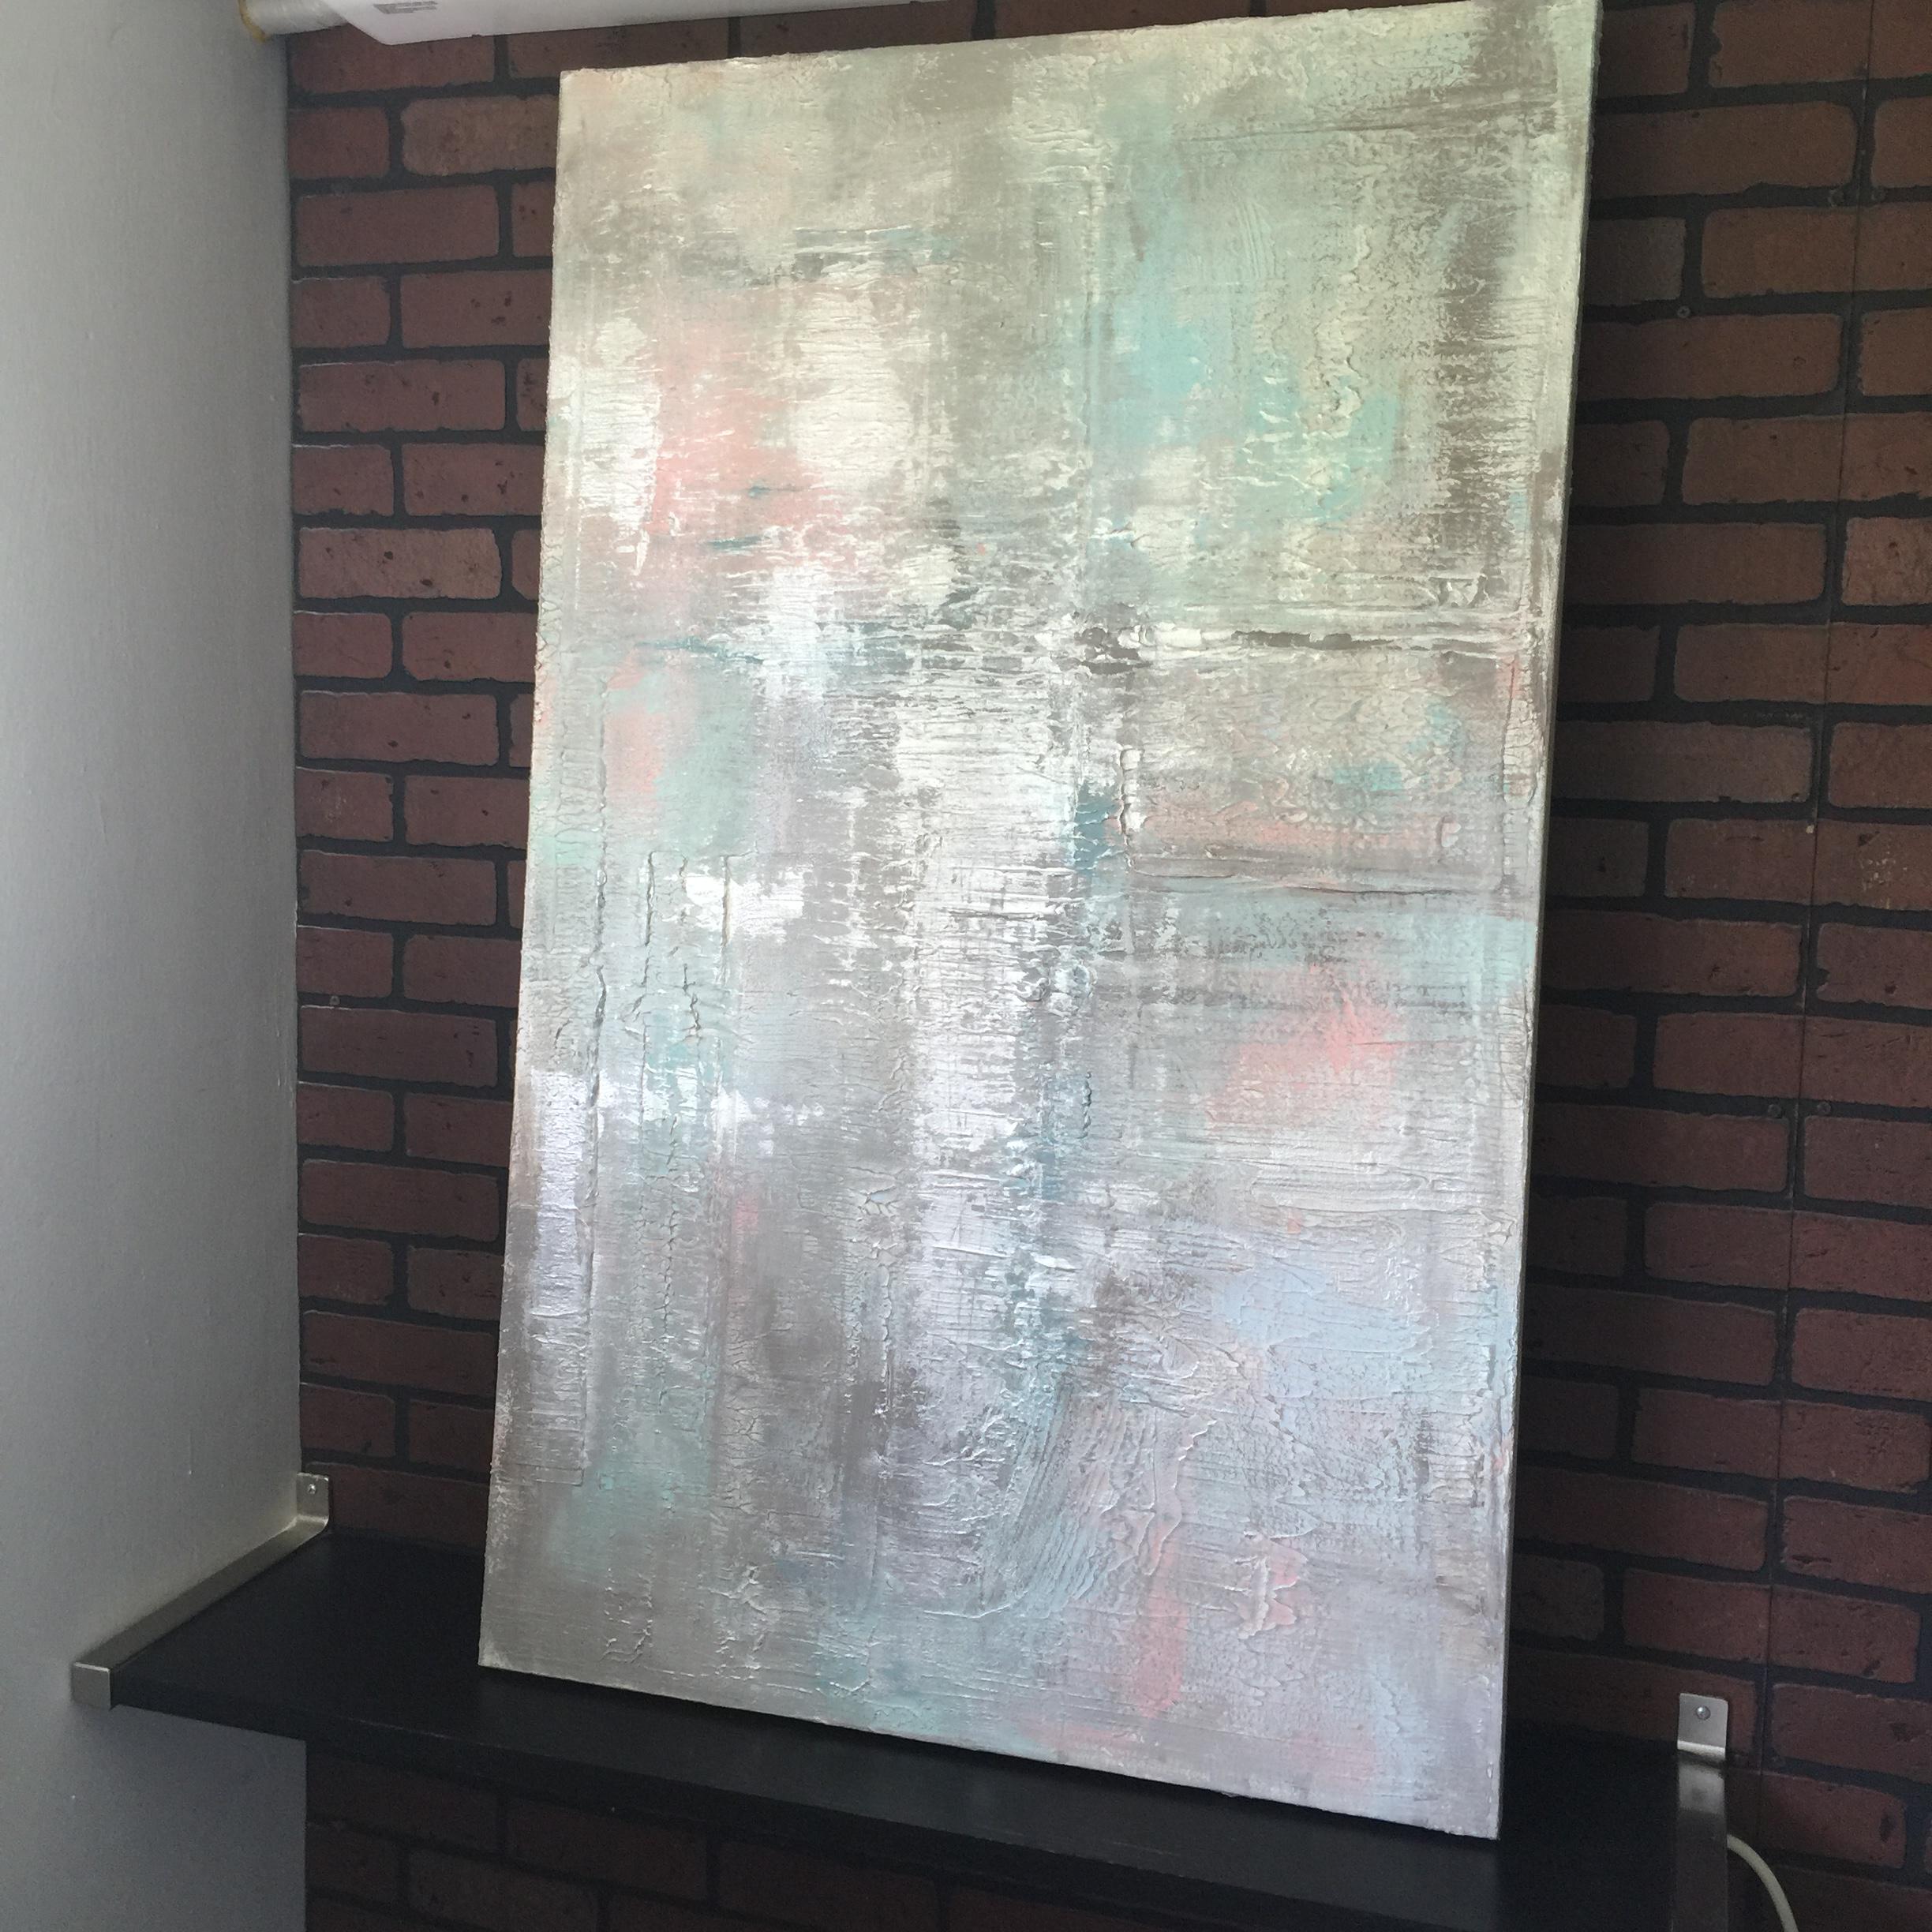 Silver Pink Contemporary Textured Mixed Medium on Canvas, Calm Water 30 x 48